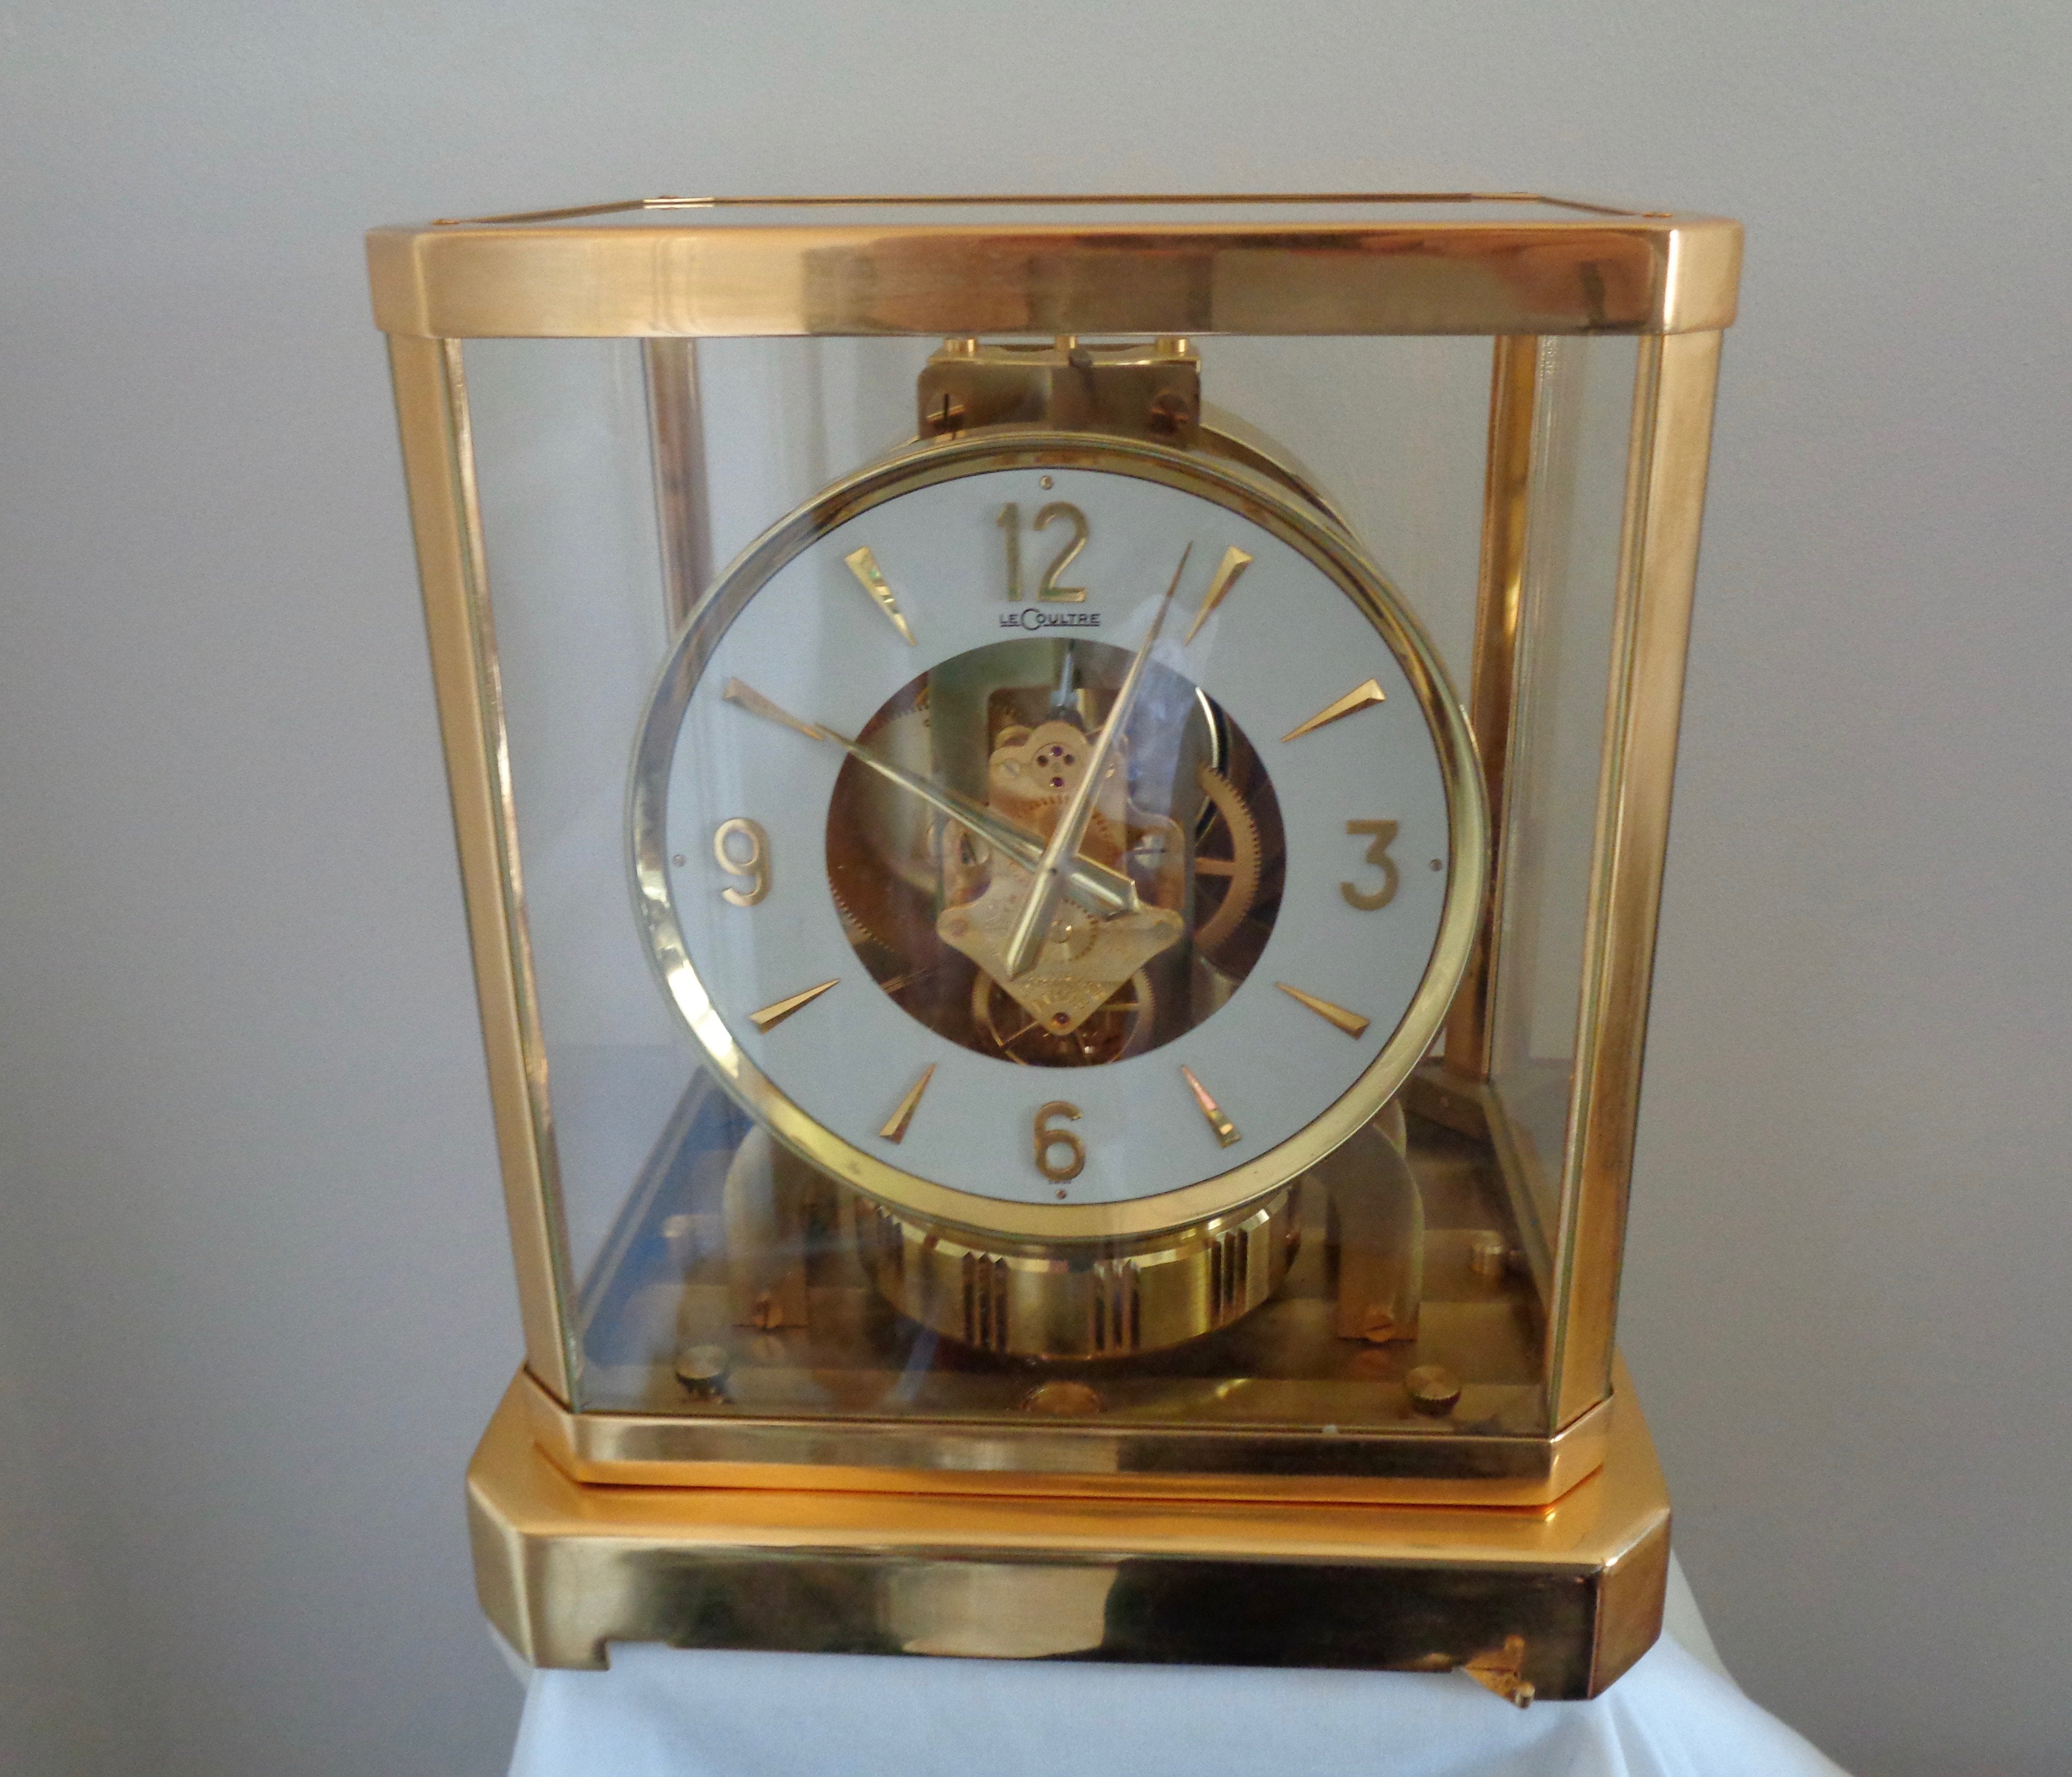 Vintage Clocks / Watches / Timepieces – Mullard Antiques and Collectibles